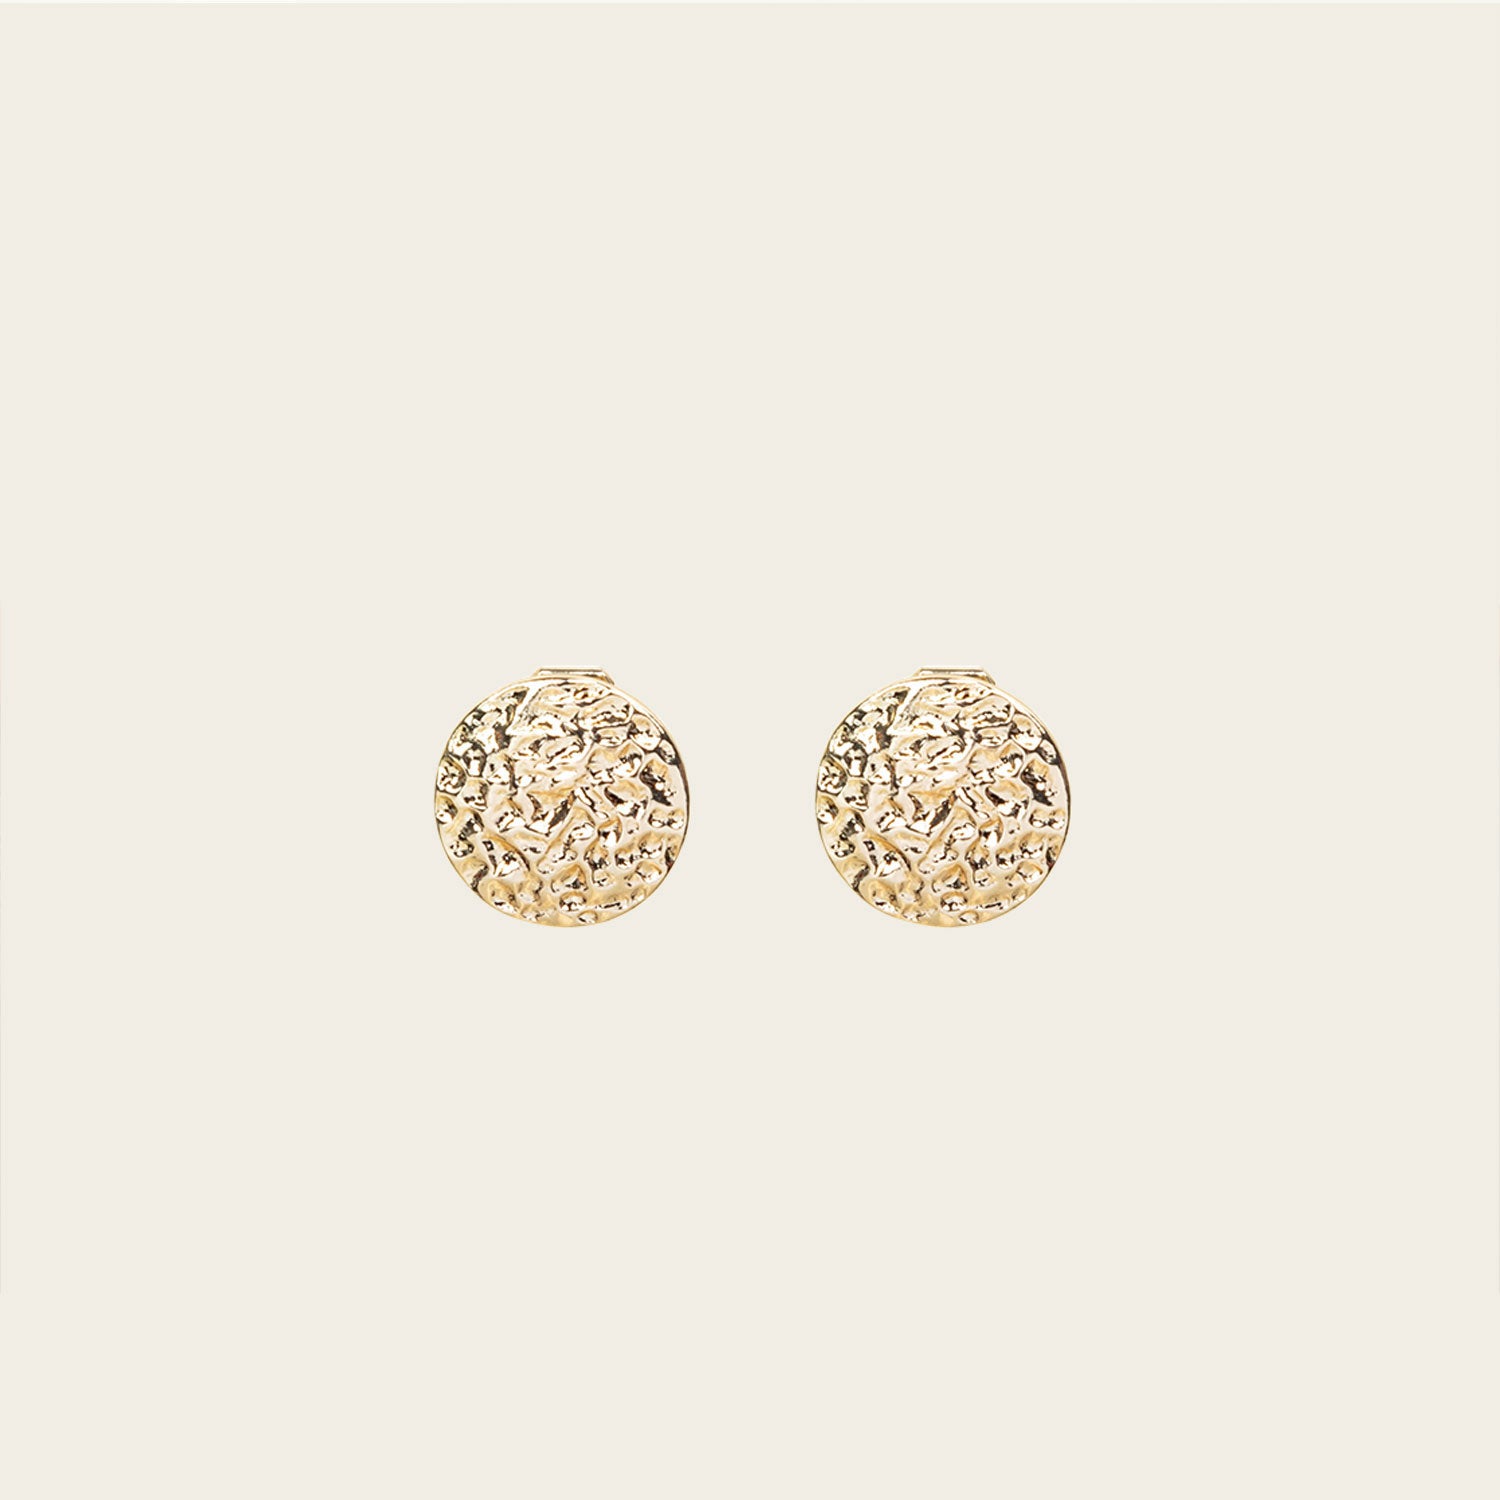 Image of the Paloma Clip-On Earrings in Gold provide a secure fit that is perfect for all ear types, including thick/large ears, sensitive ears, small/ thin ears, and stretched/healing ears. These earrings are crafted with a copper alloy and are free of lead and nickel. Their removable rubber padding ensures comfortable wear for up to 12 hours. This package contains one pair of earrings.